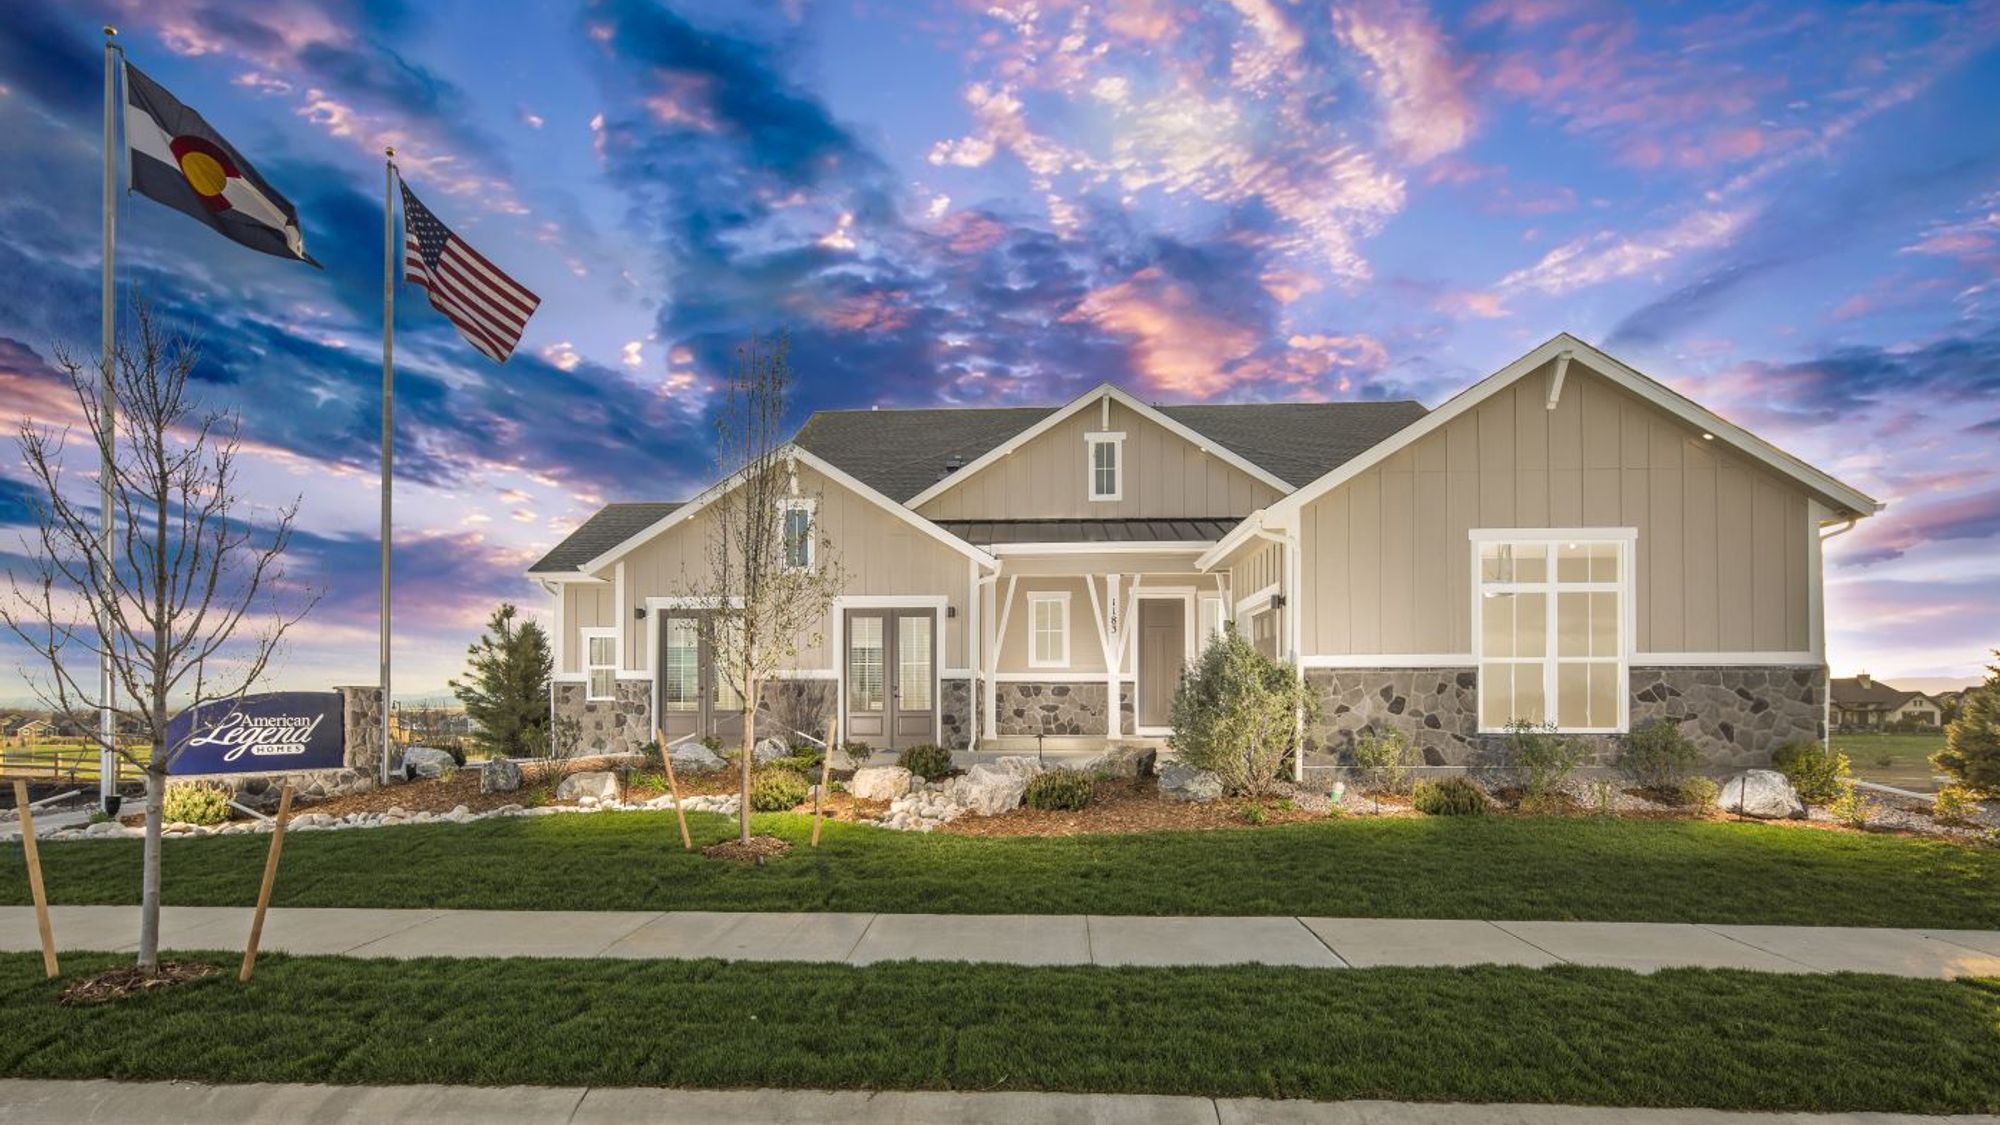 Plan C652 Front Elevation by American Legend Homes